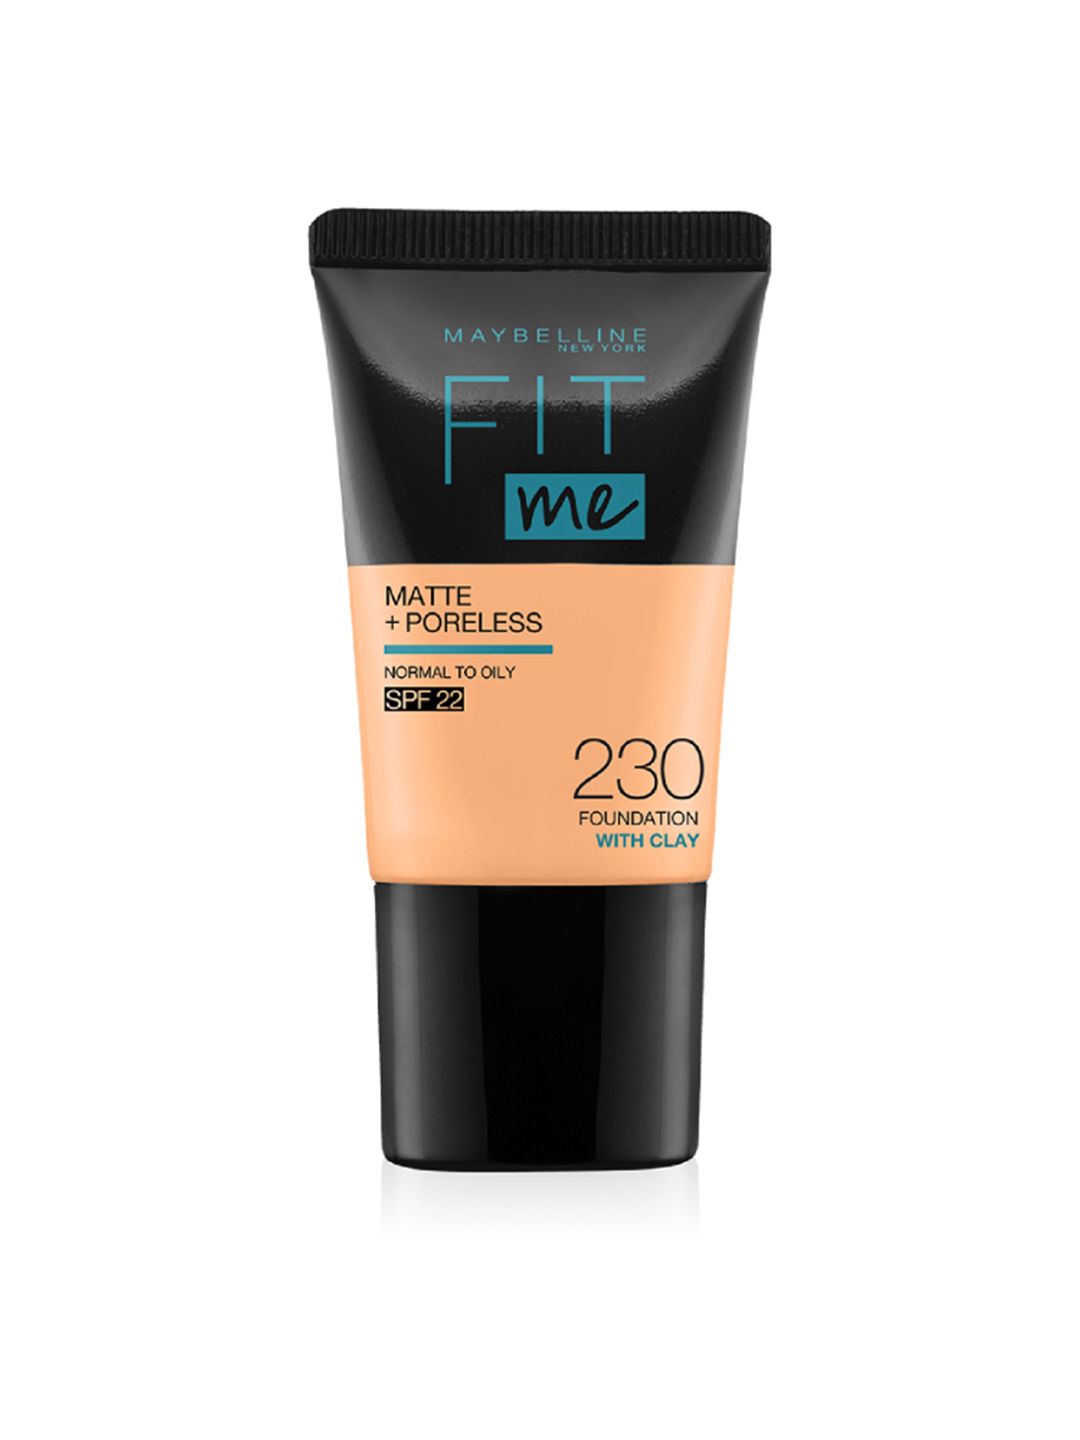 Maybelline New York Fit Me Matte Poreless Liquid Foundation Tube 18 ml - Natural Buff 230 Price in India